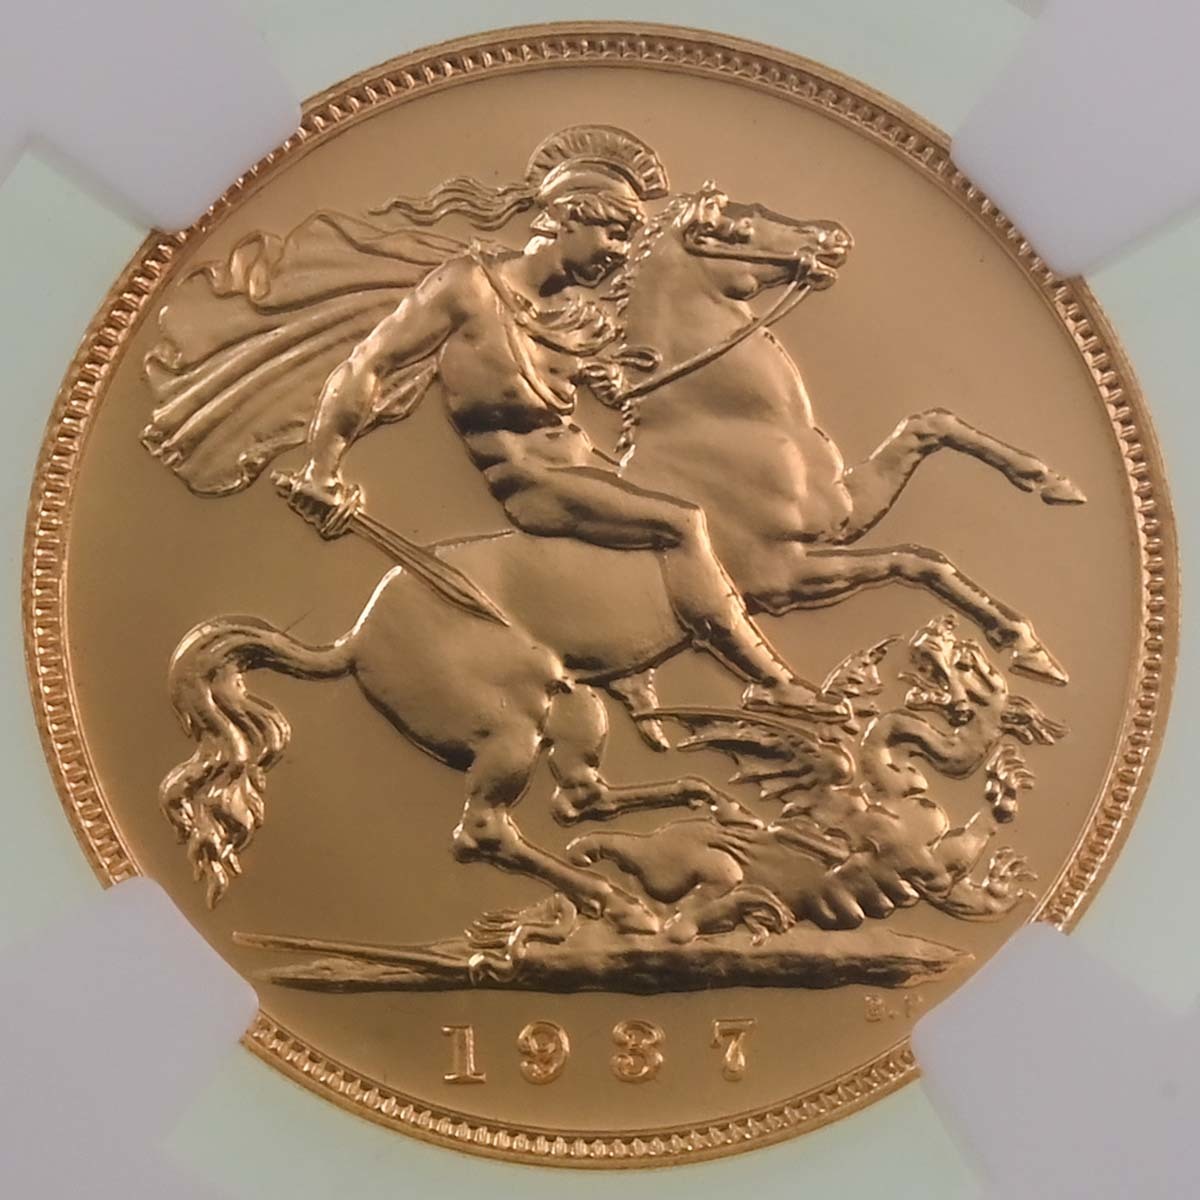 1937 George VI Gold Proof Half Sovereign Coin NGC Graded PF 65 Reverse